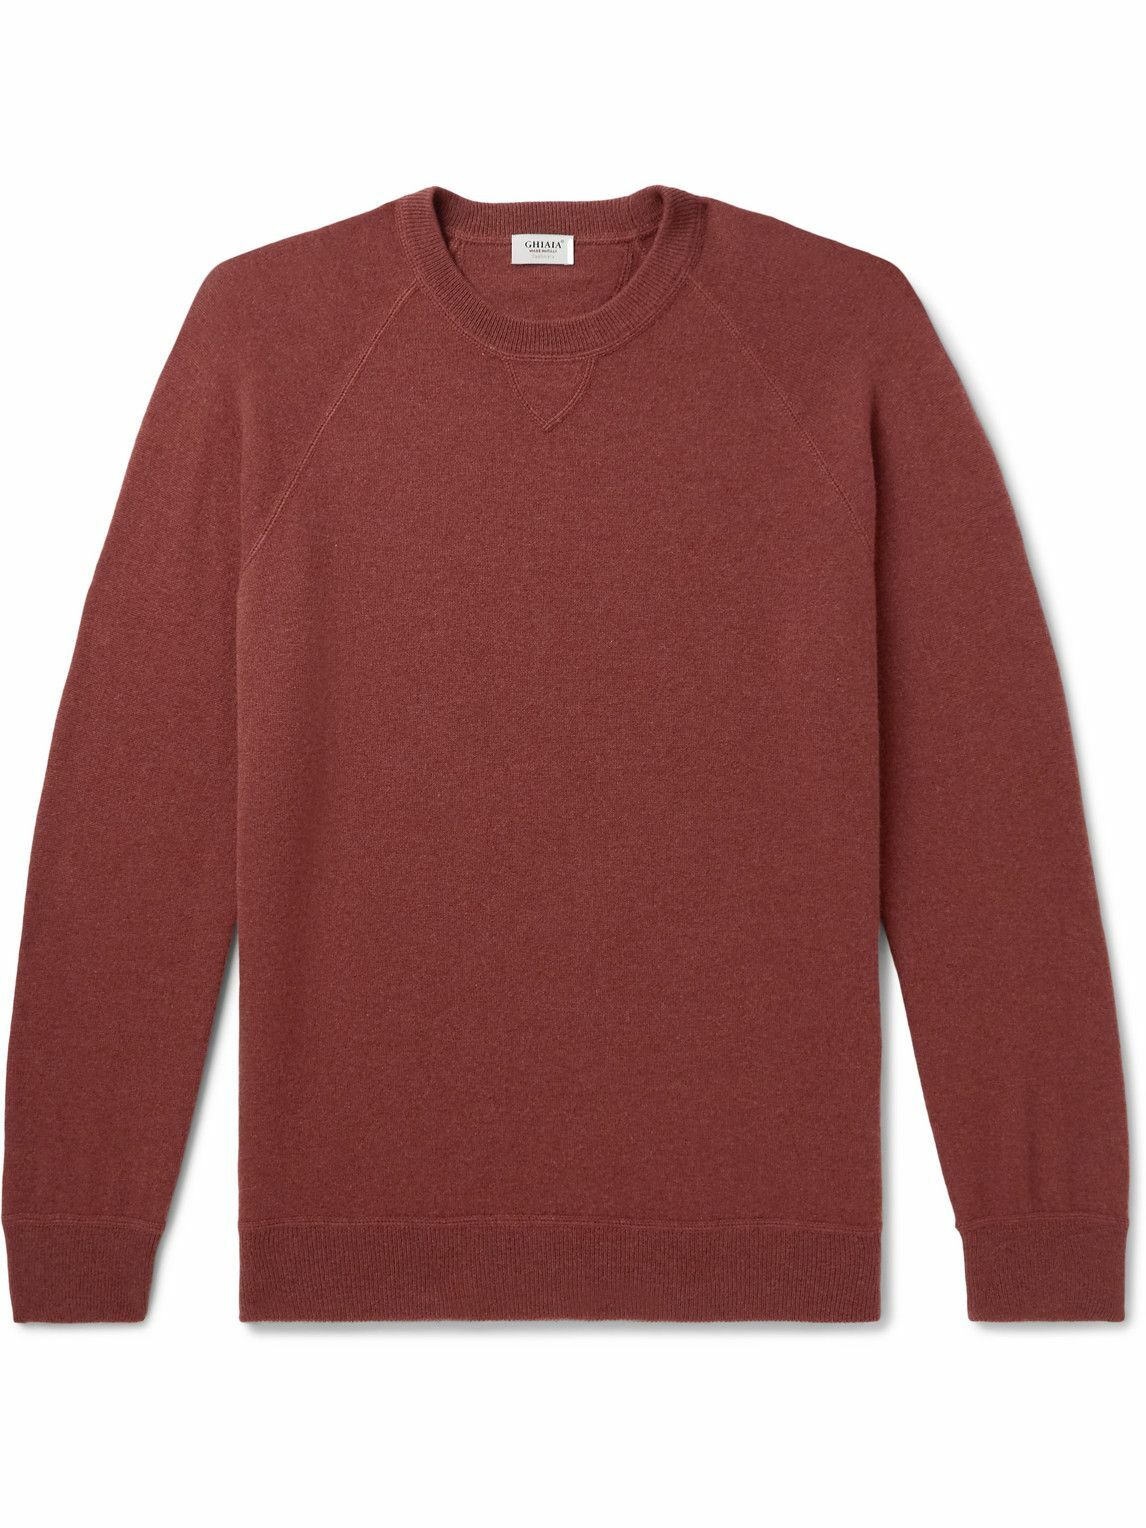 Ghiaia Cashmere - Cashmere Sweater - Red